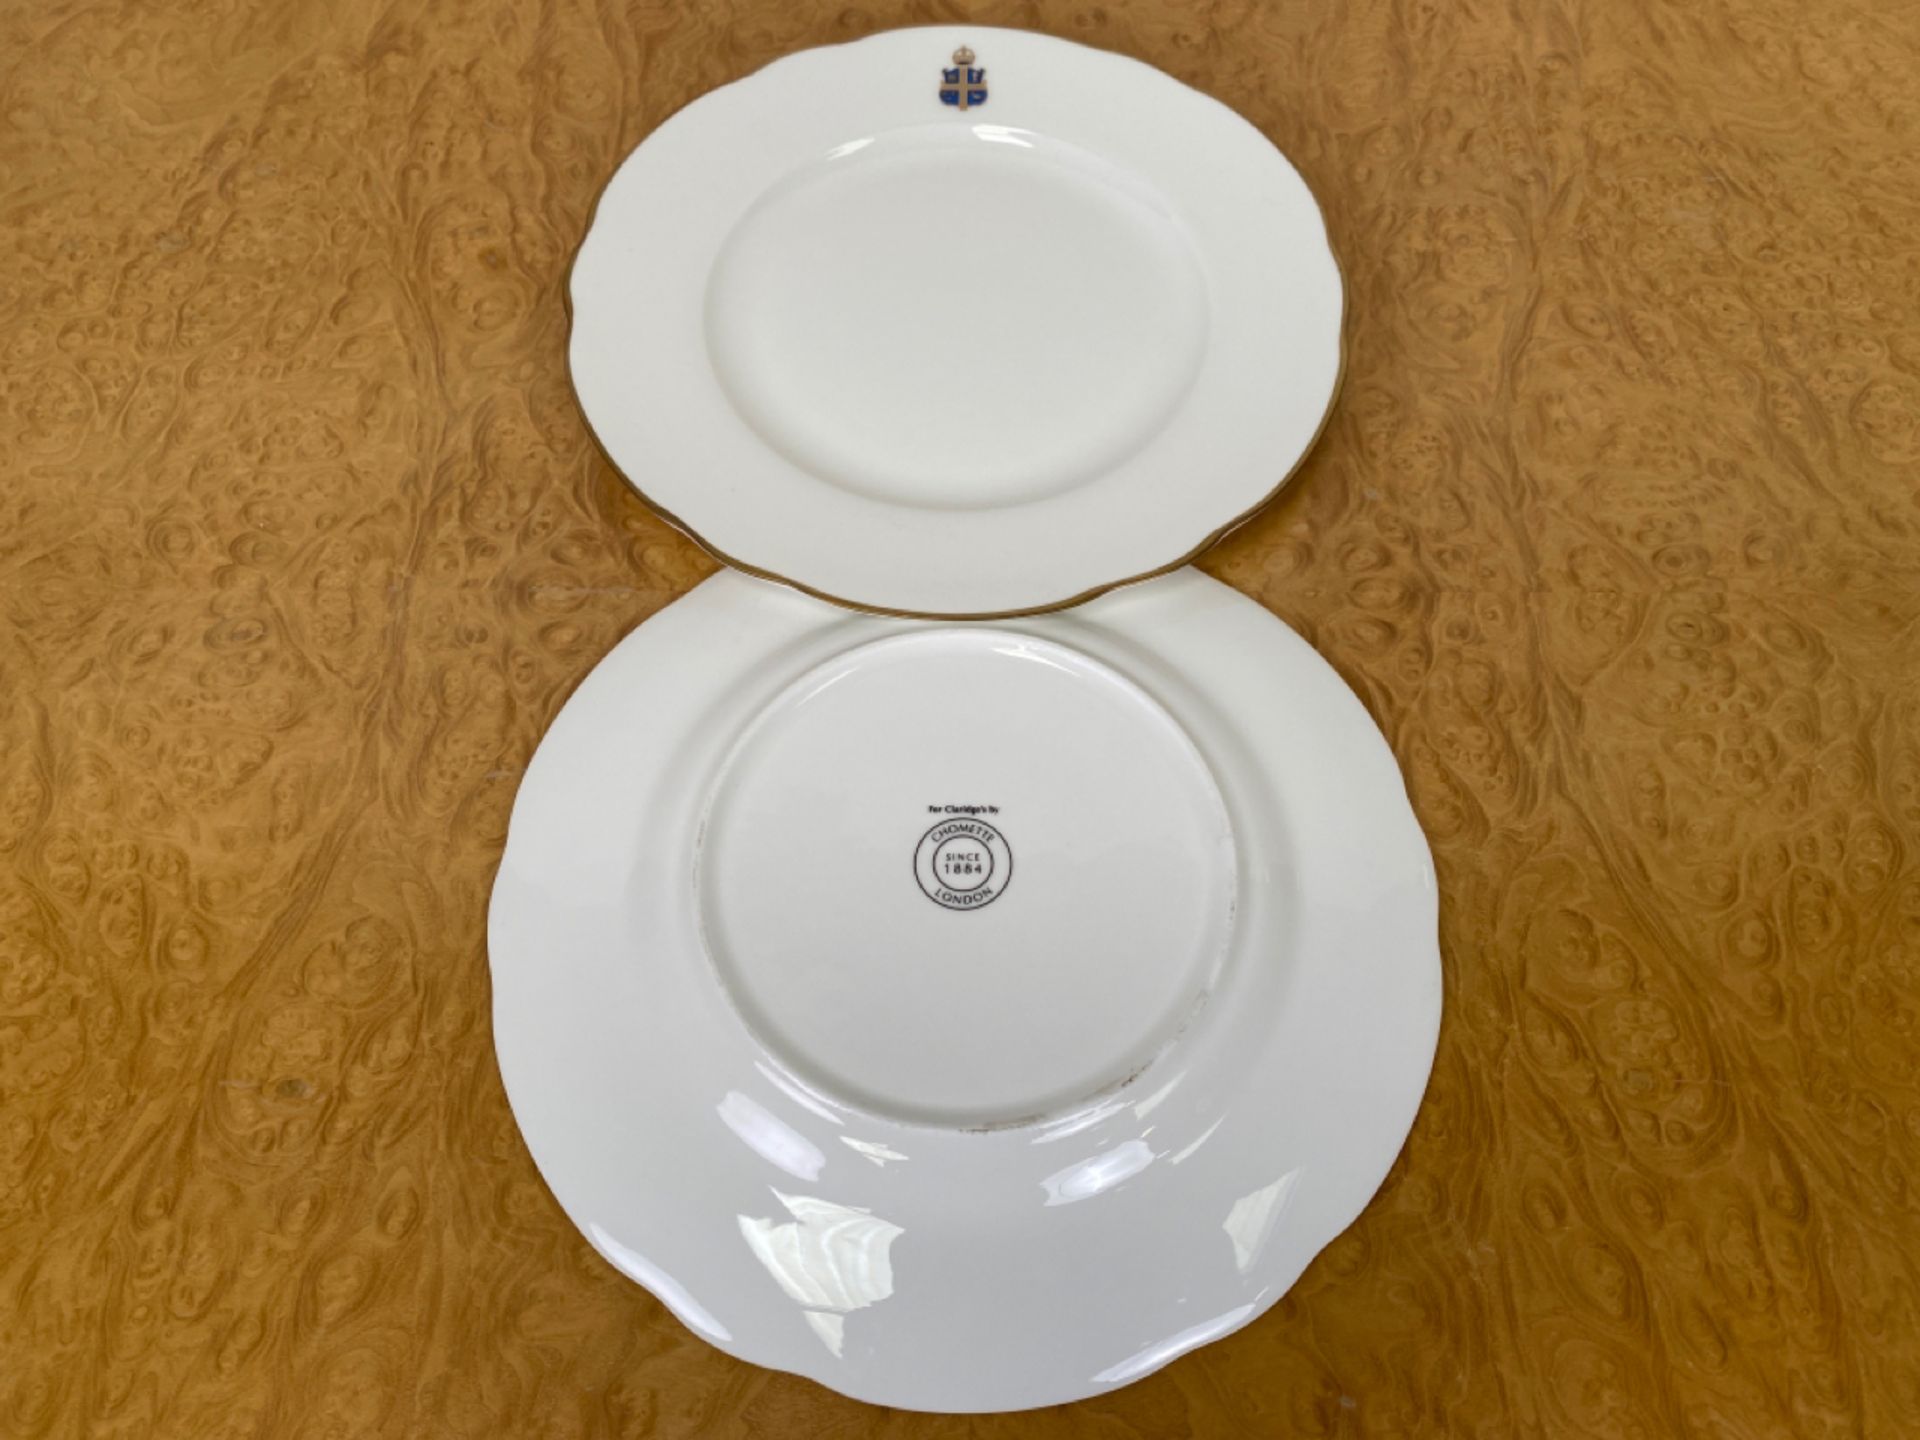 Set of Crested Crockery for Claridge's by Chommette 1884 - Image 23 of 36